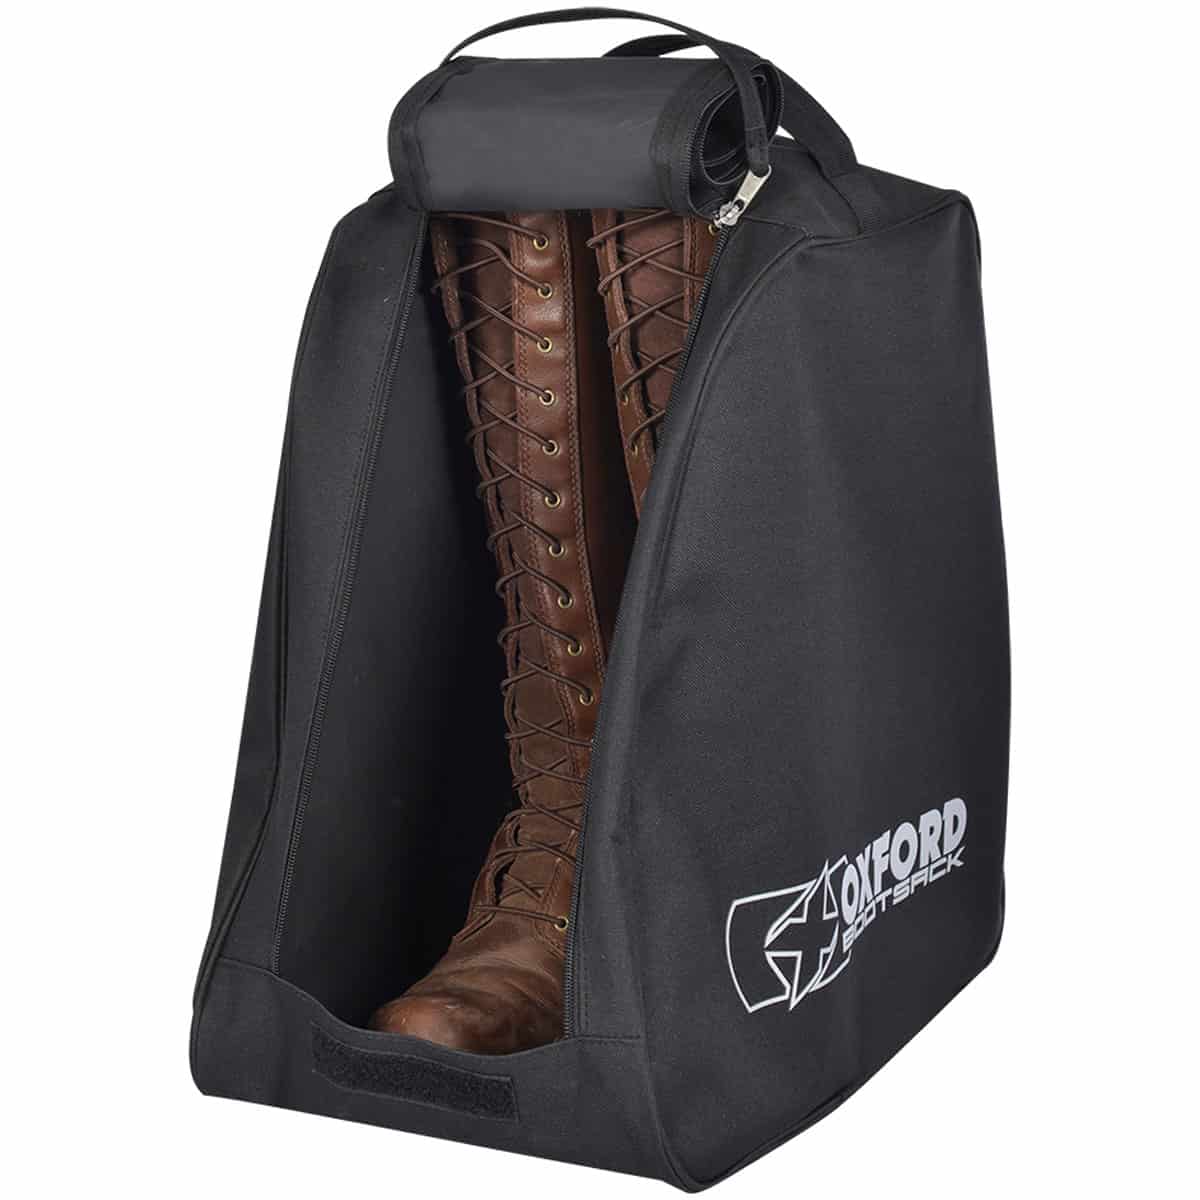 Whatever your boot-storing needs, put them in the Oxford Bootsack Essential Boot Carrier